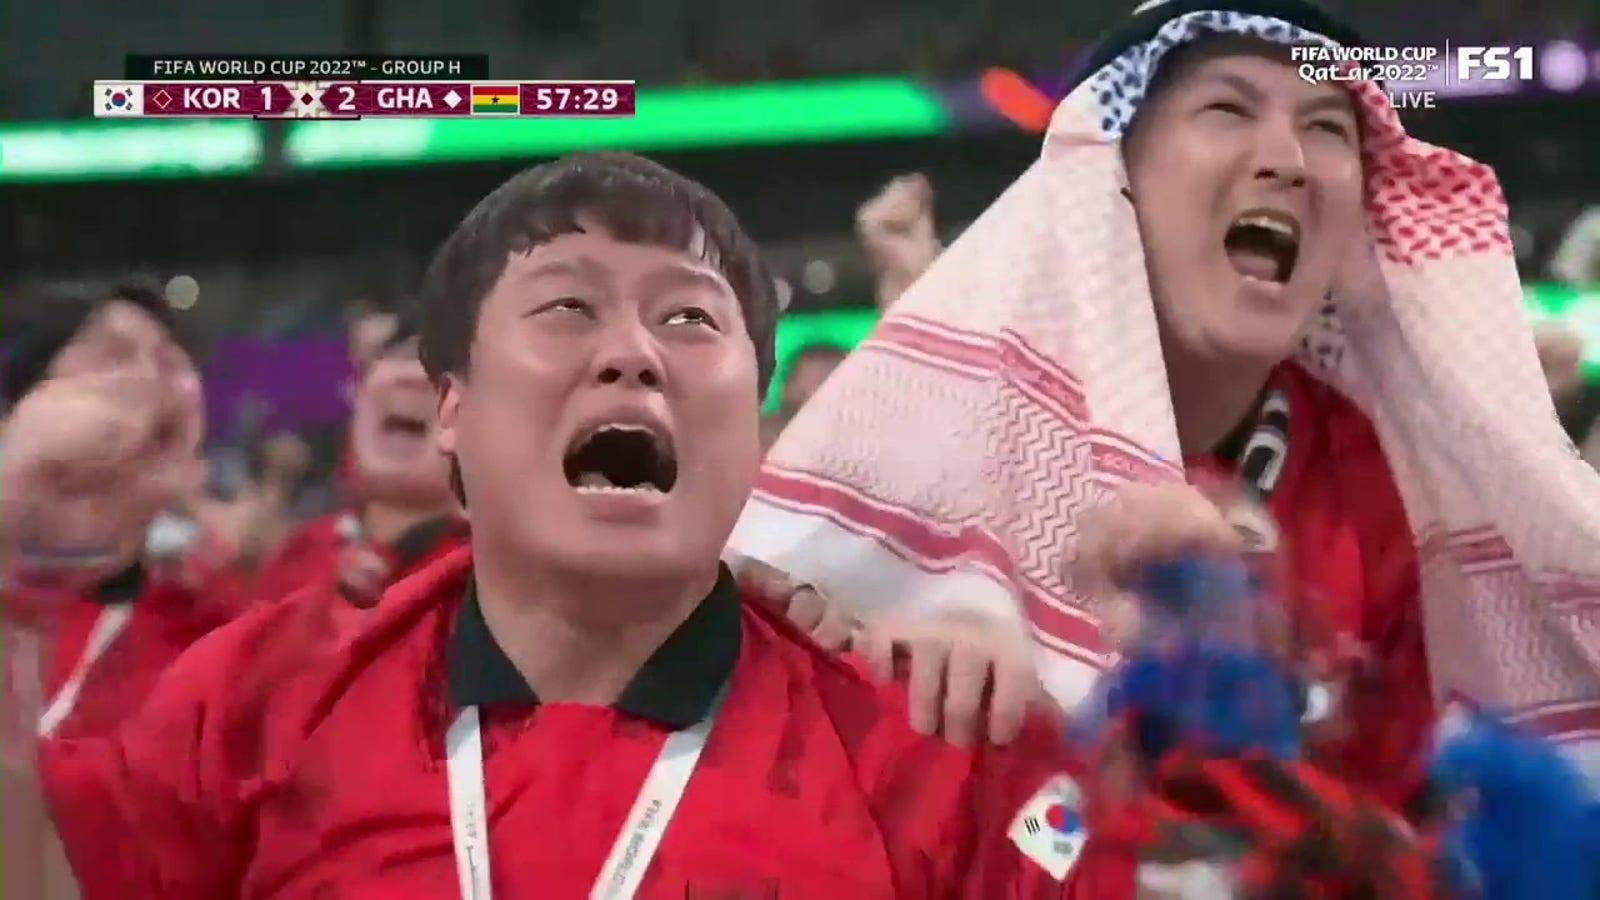 Cho Goo-sung from the Republic of Korea scored a goal against Ghana in the 58th minute  Football World Cup 2022